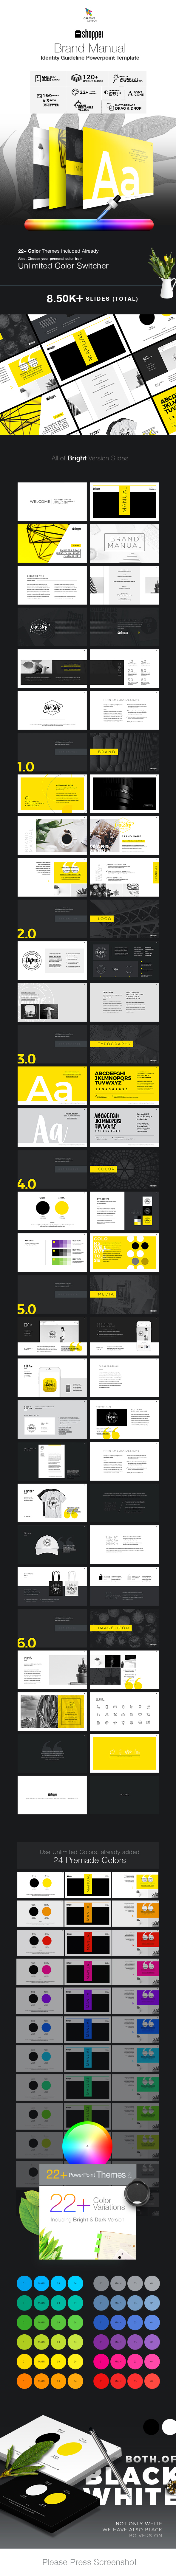 Brand Manual PowerPoint